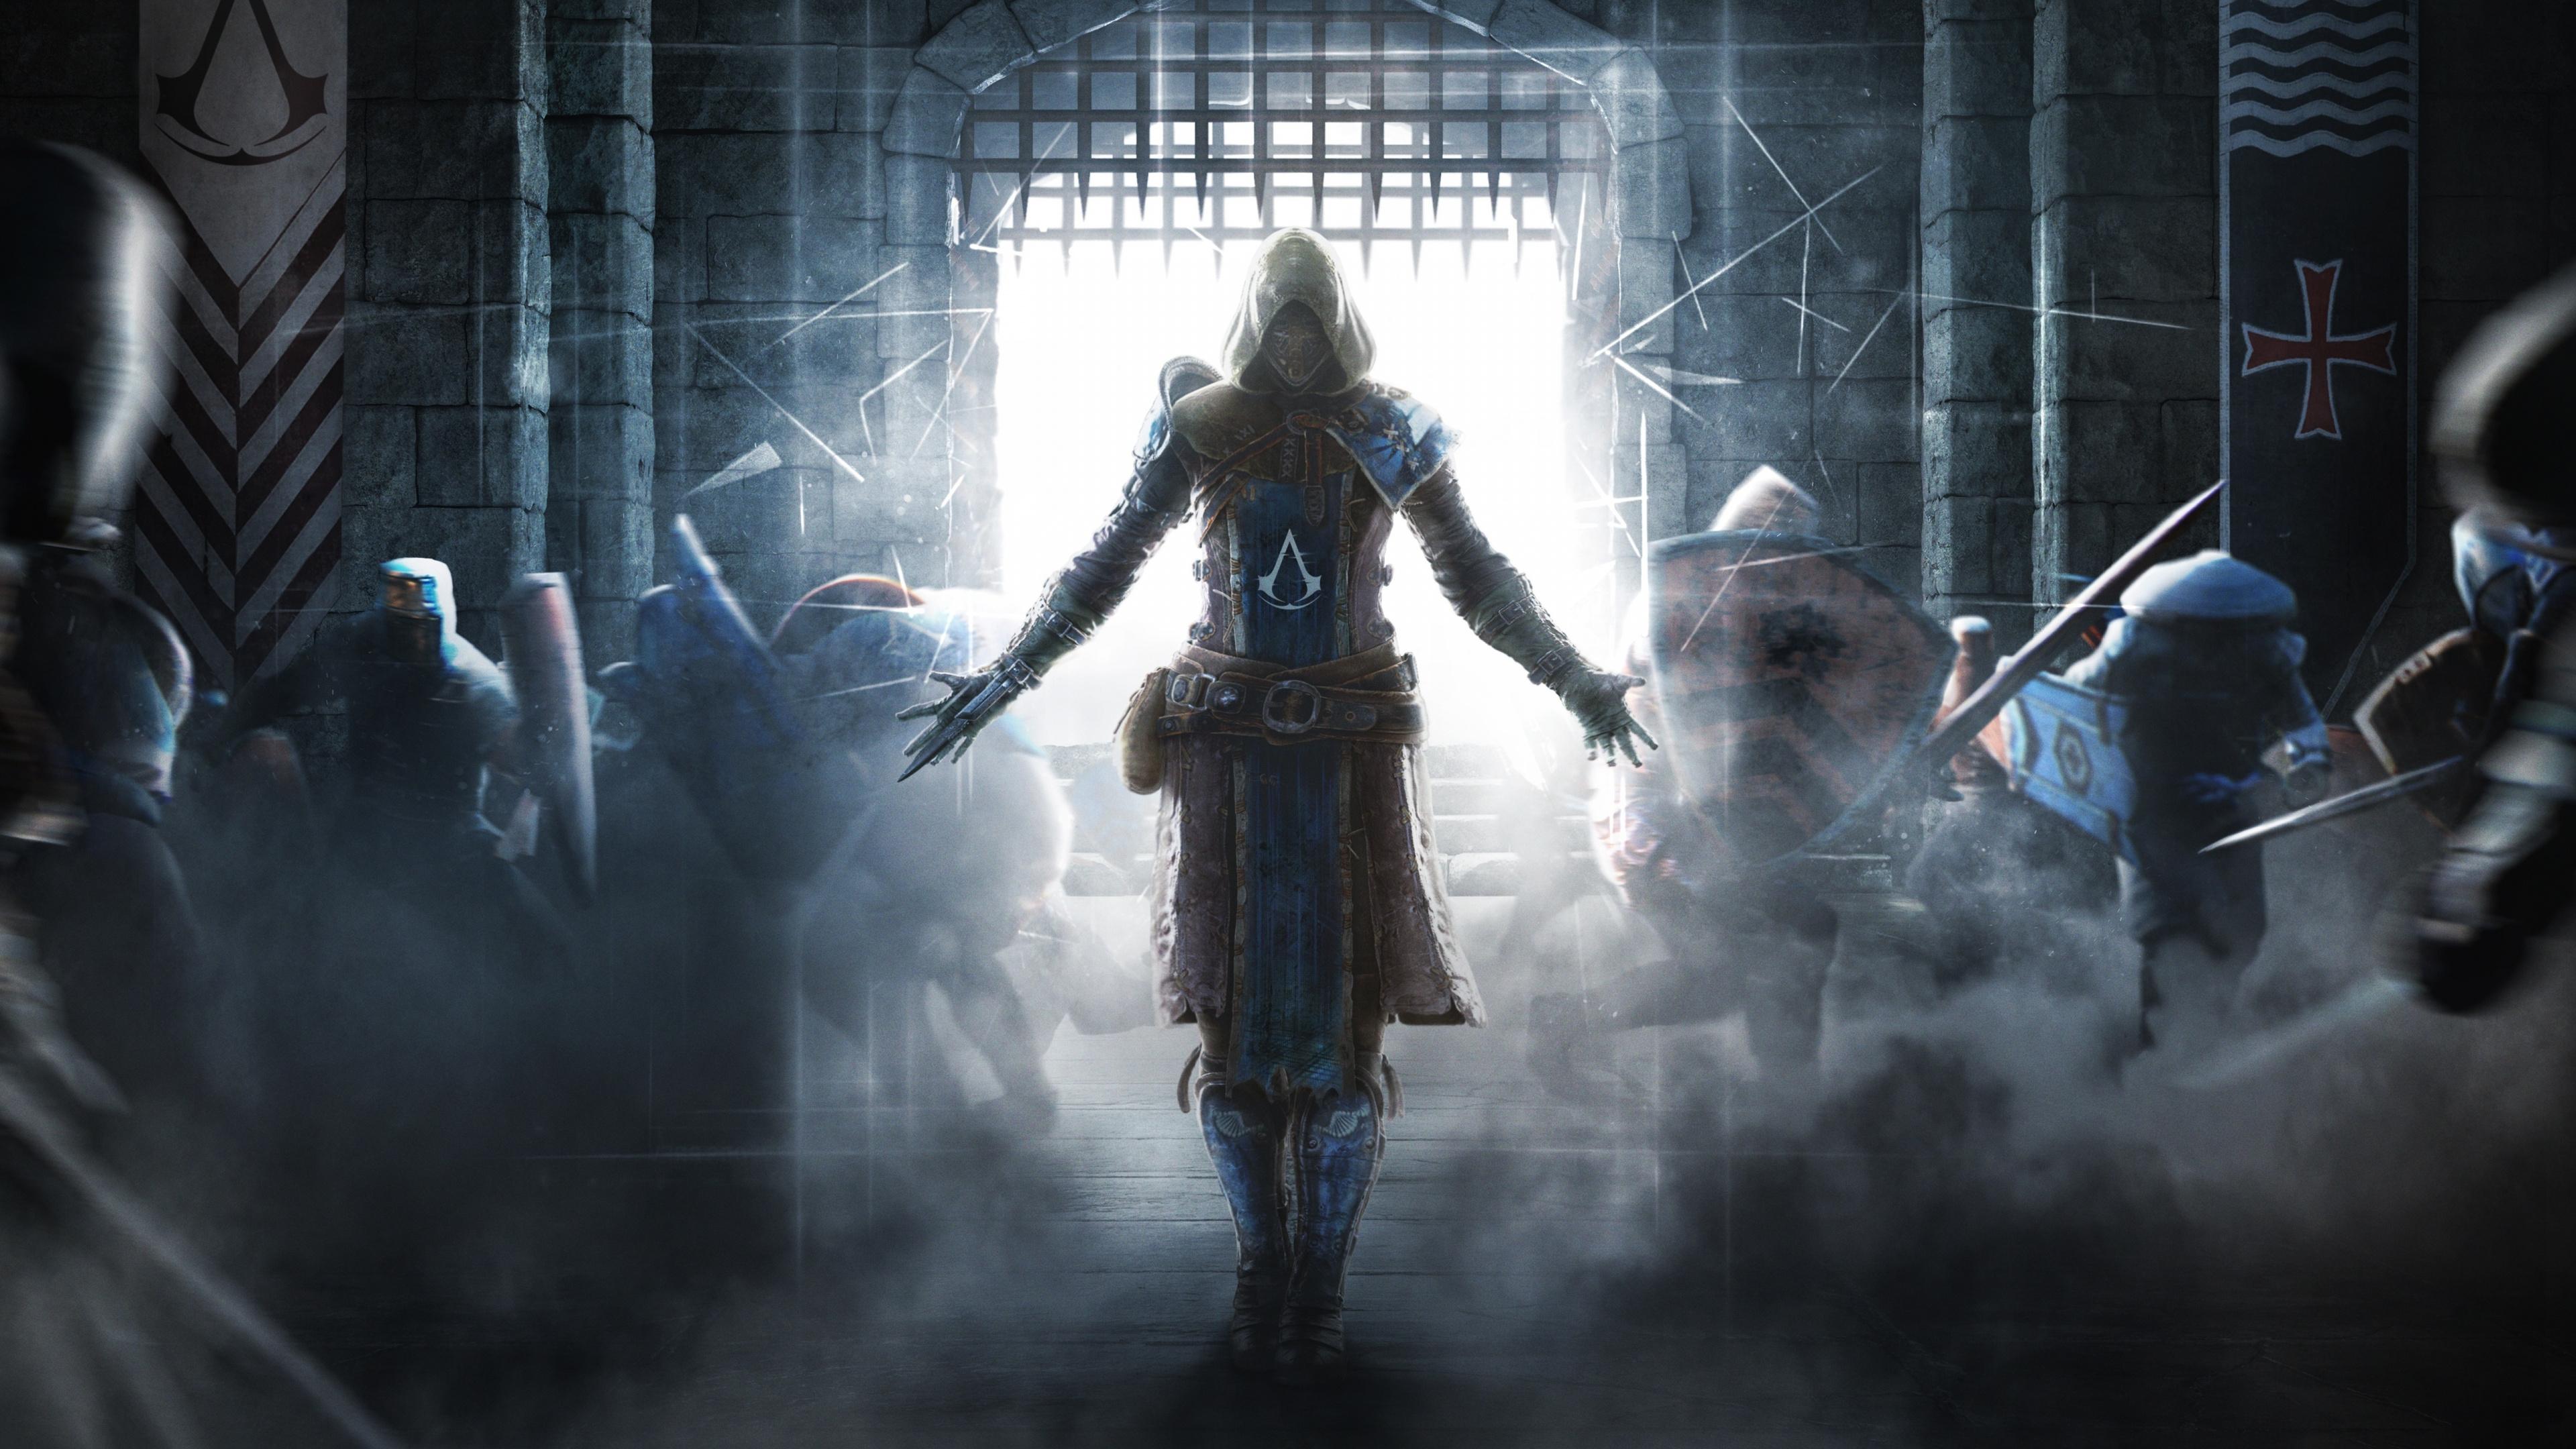 Download 3840x2160 wallpaper warrior, for honor, video game